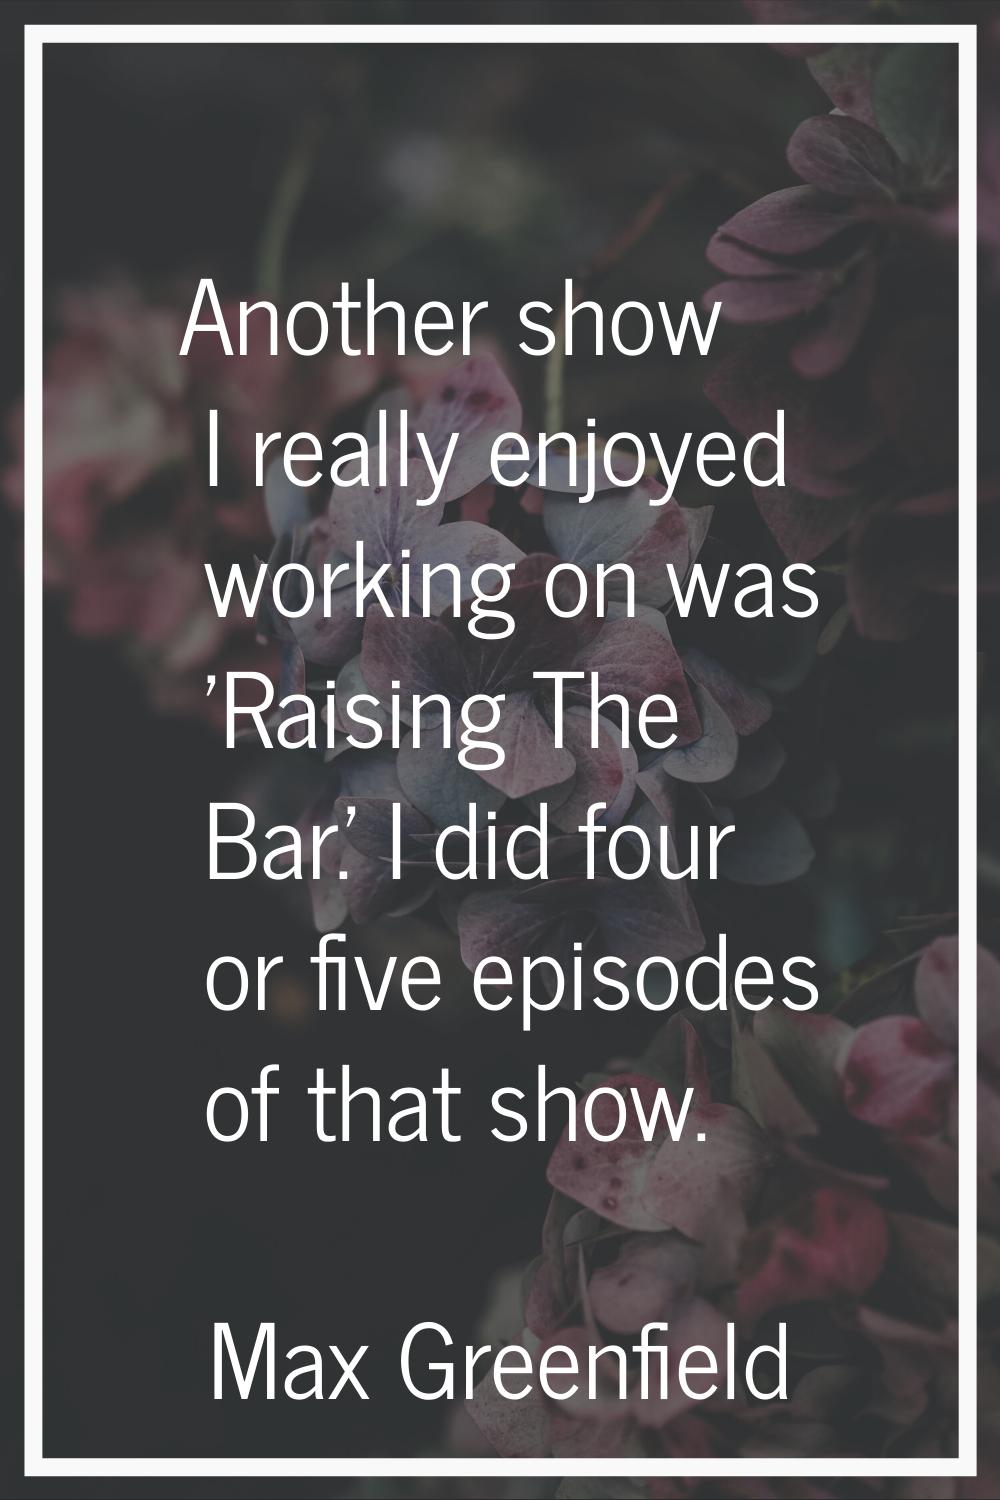 Another show I really enjoyed working on was 'Raising The Bar.' I did four or five episodes of that